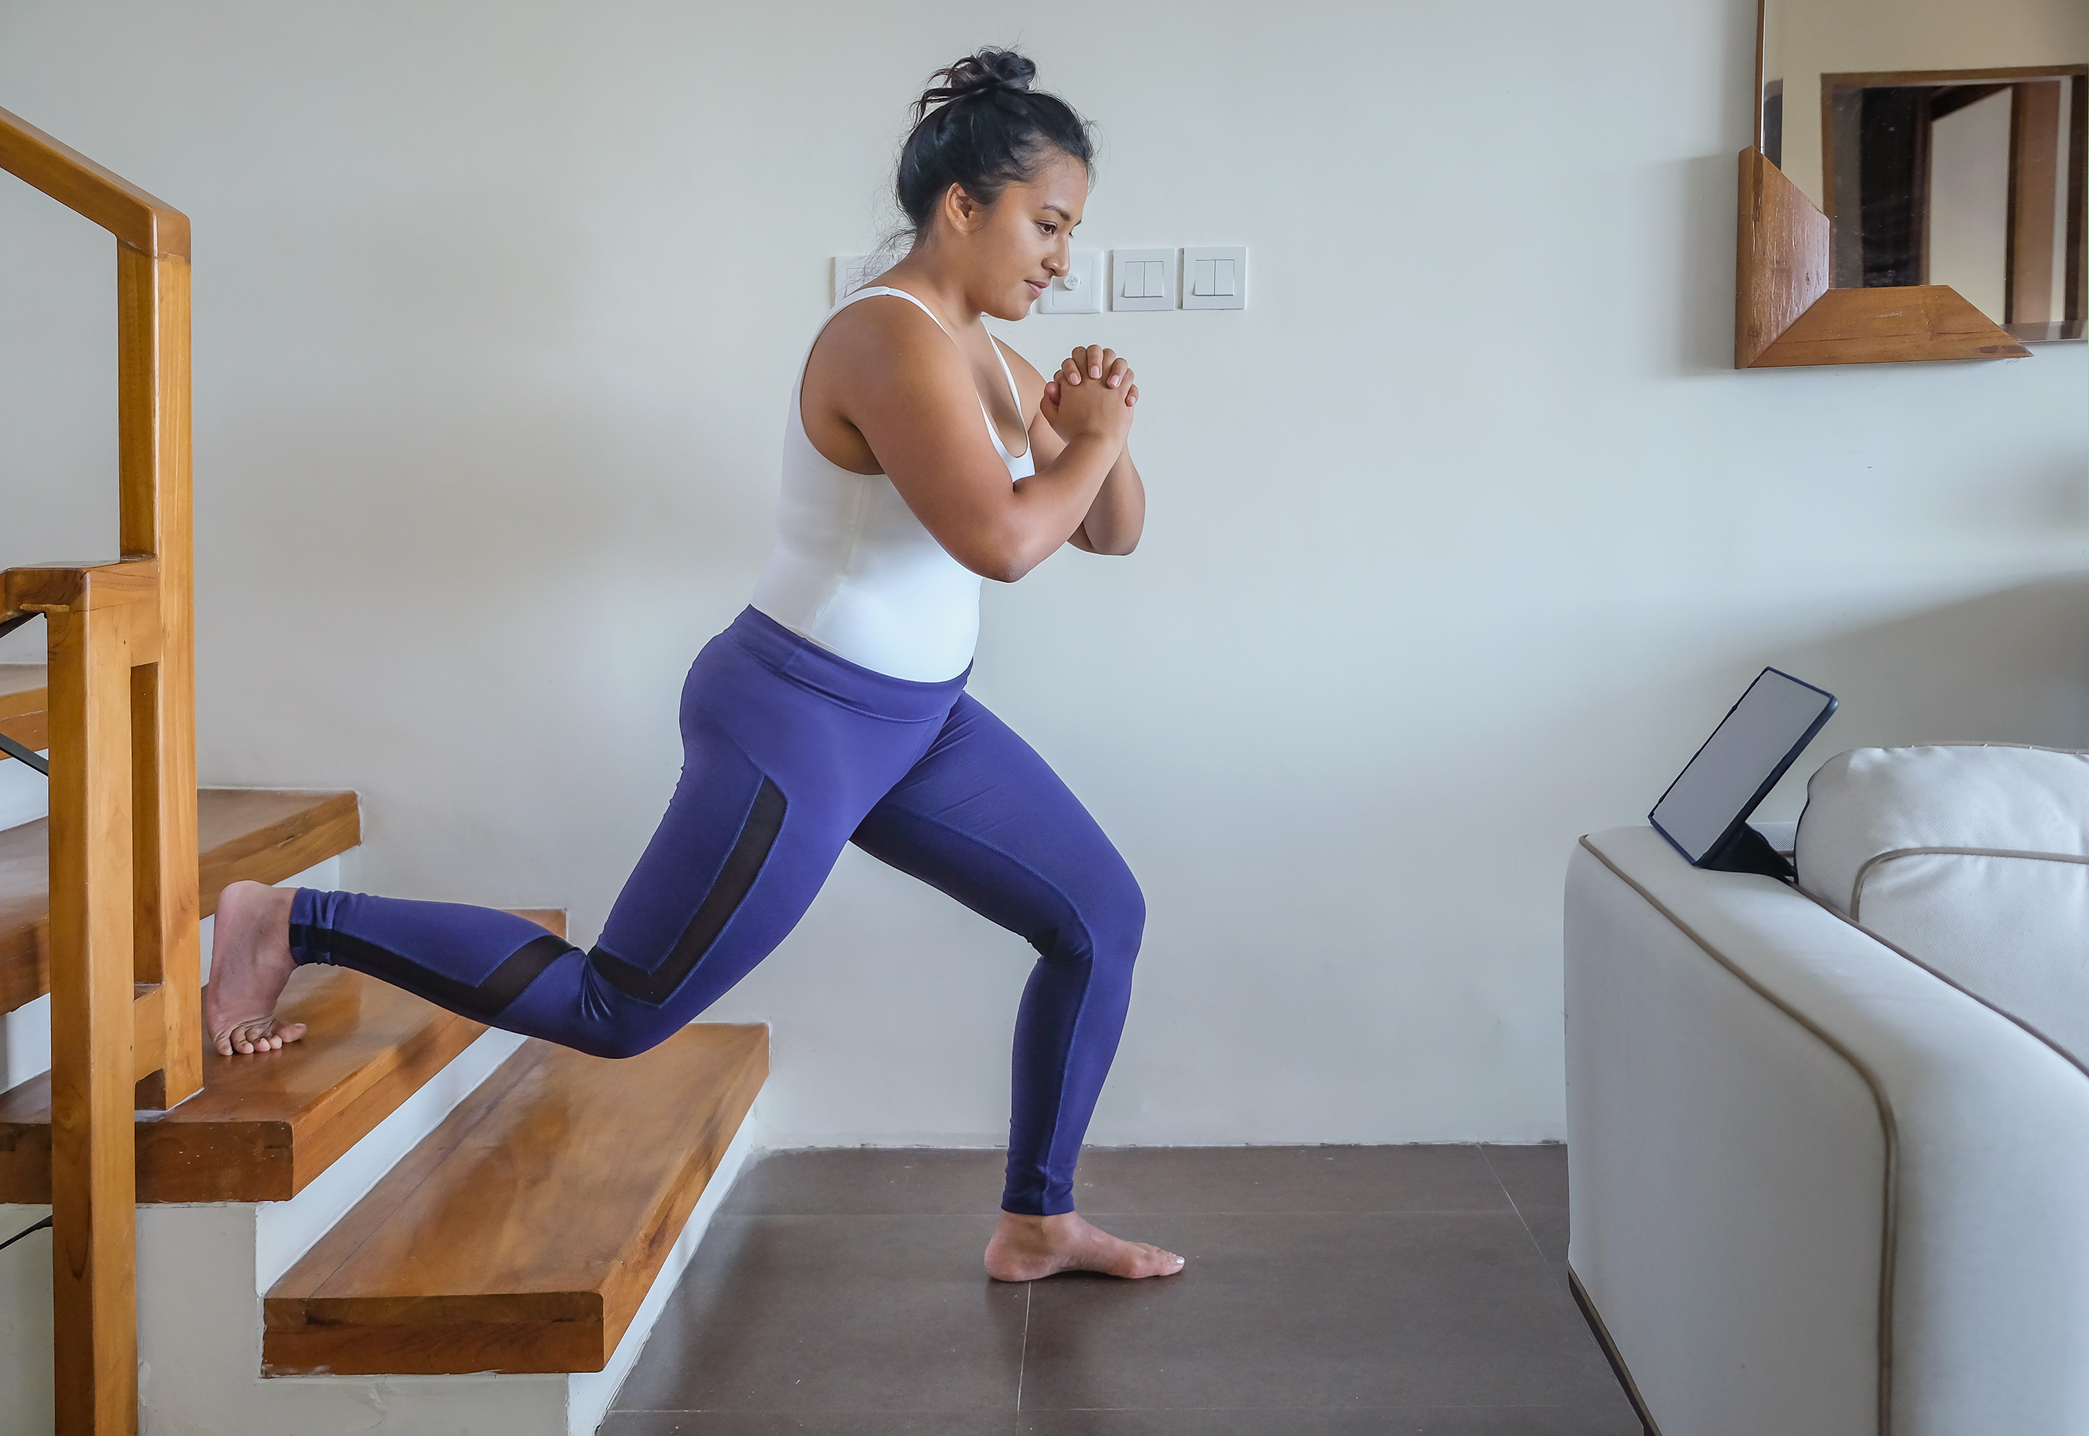 5 Tips for Choosing an Effective YouTube Fitness Video